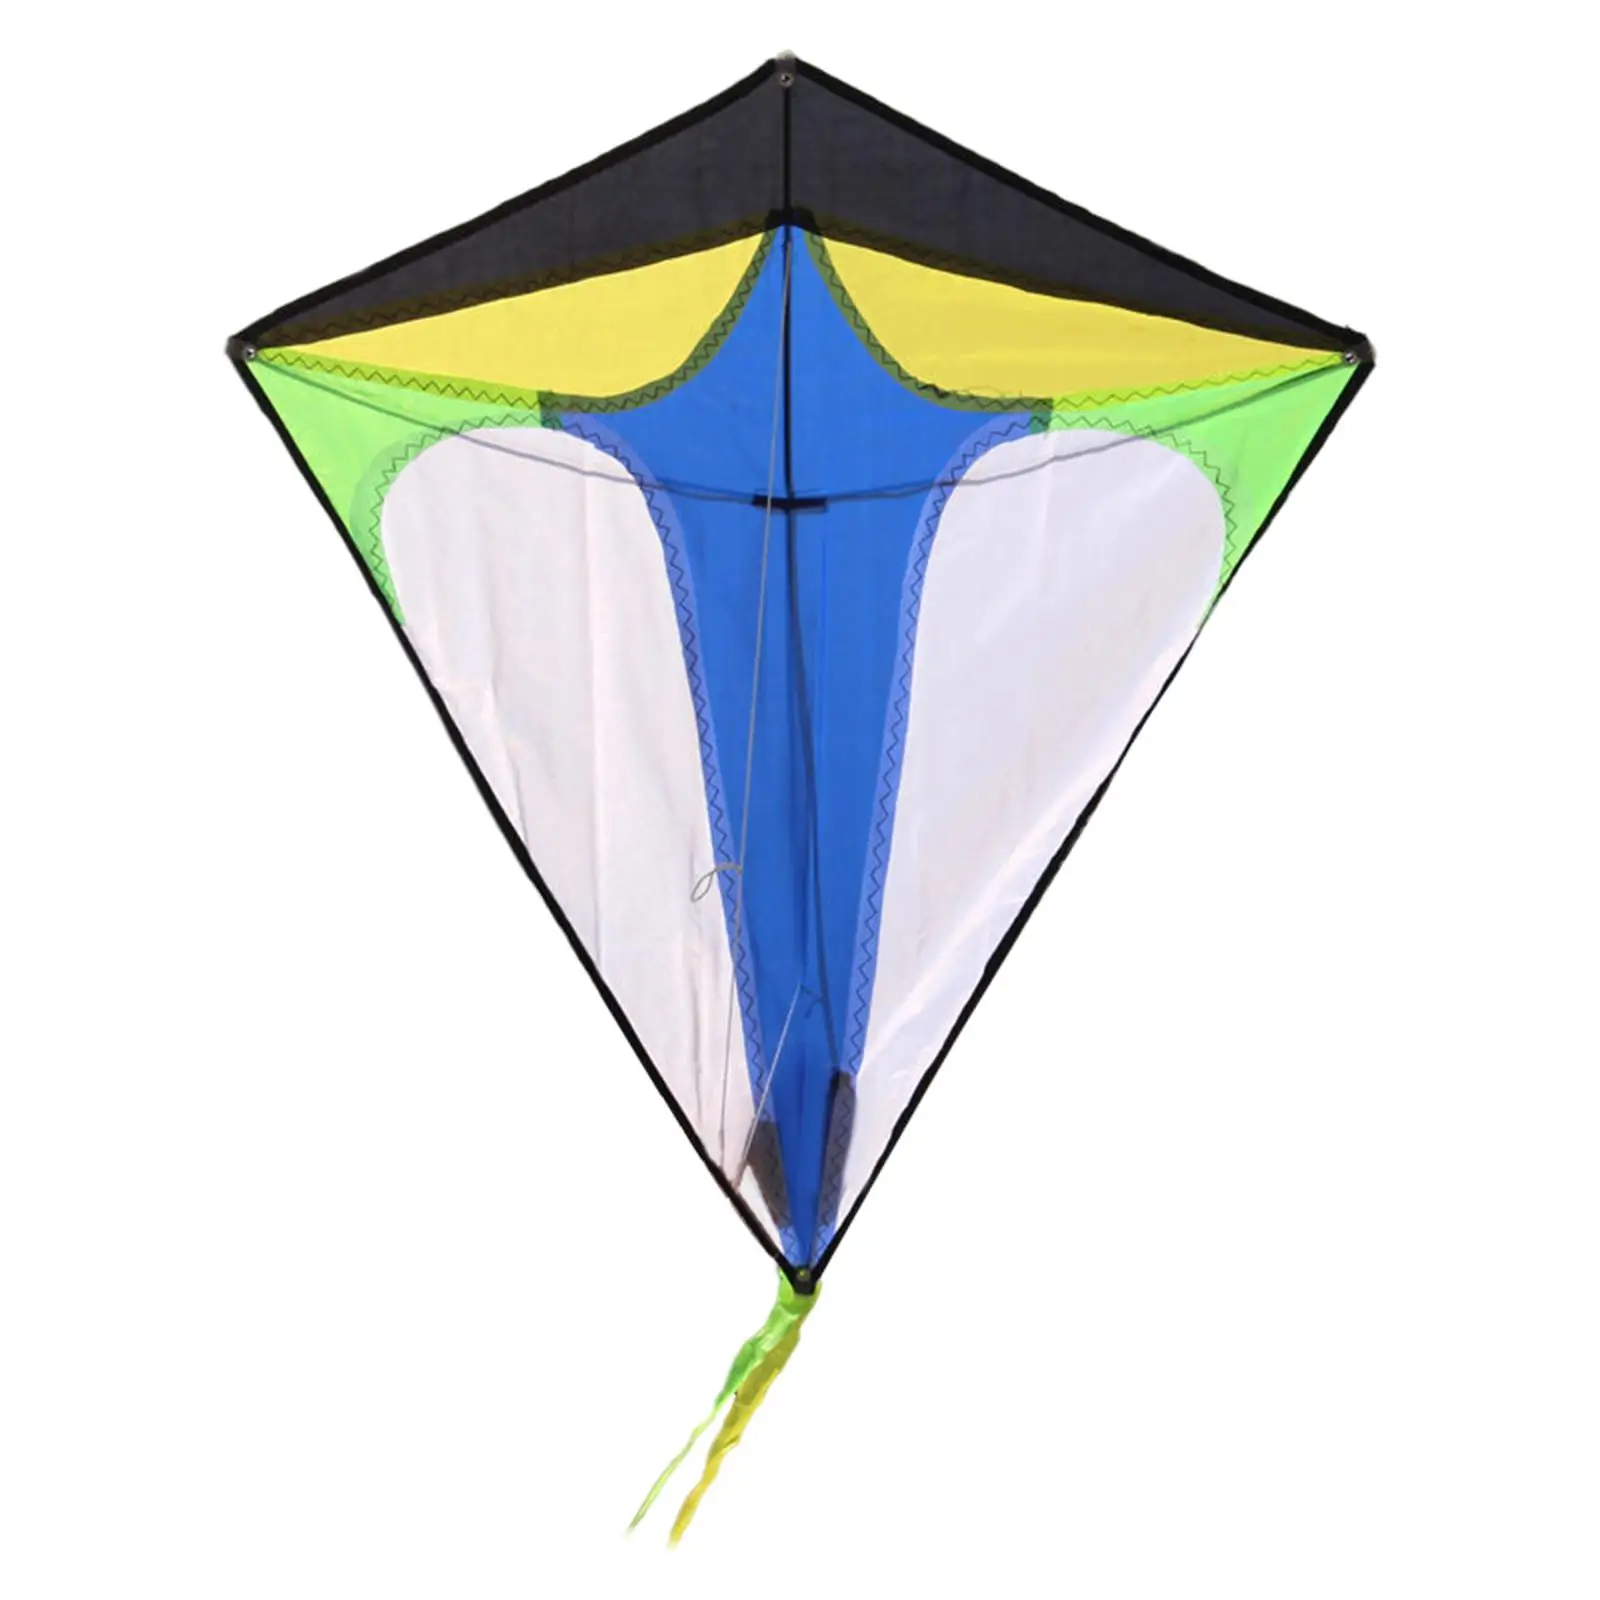 Colorful Diamond Kite, Fly  Durable Lightweight with String  for Beginner Games Outdoor Activities Sports Great Gift